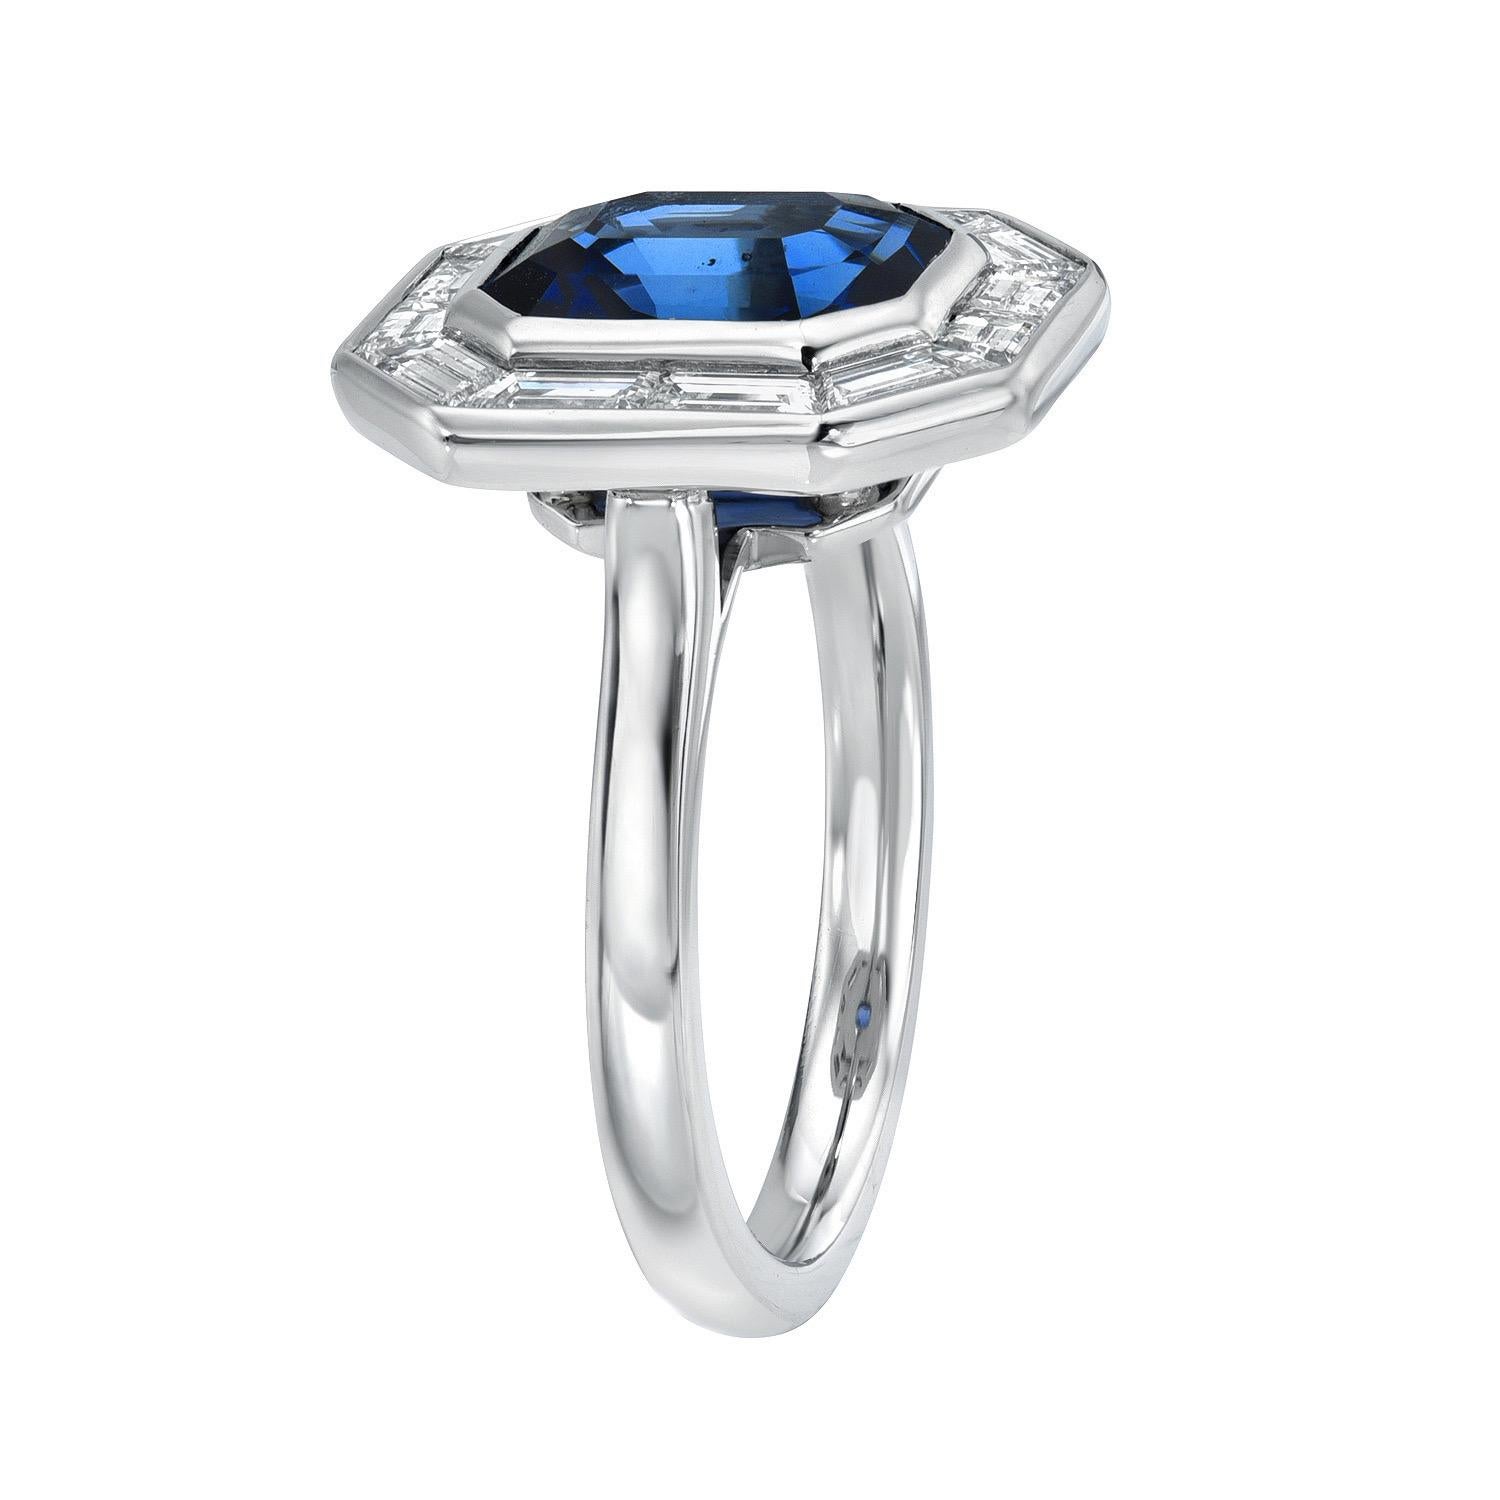 Classic 3.54 carat Blue Sapphire Emerald Cut, platinum ring, framed with a total of 0.95 carat Trapezoid diamonds F/VS.  
Ring size 6. Resizing is complementary upon request.
The GIA gem report is attached to the image selection for your